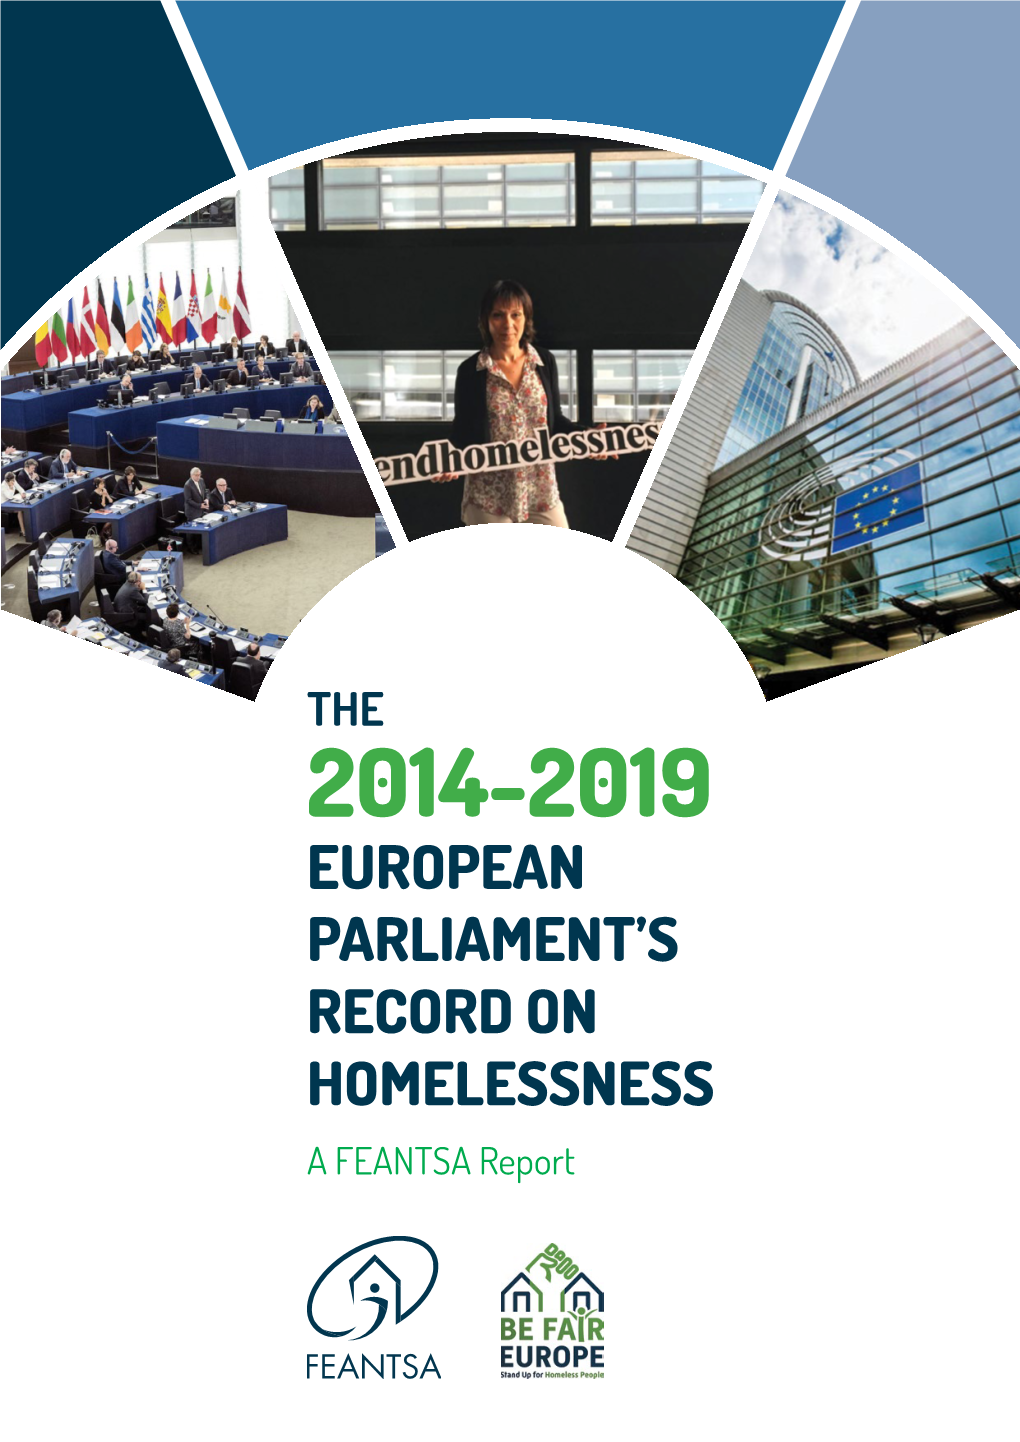 The 2014-2019 European Parliament's Record On